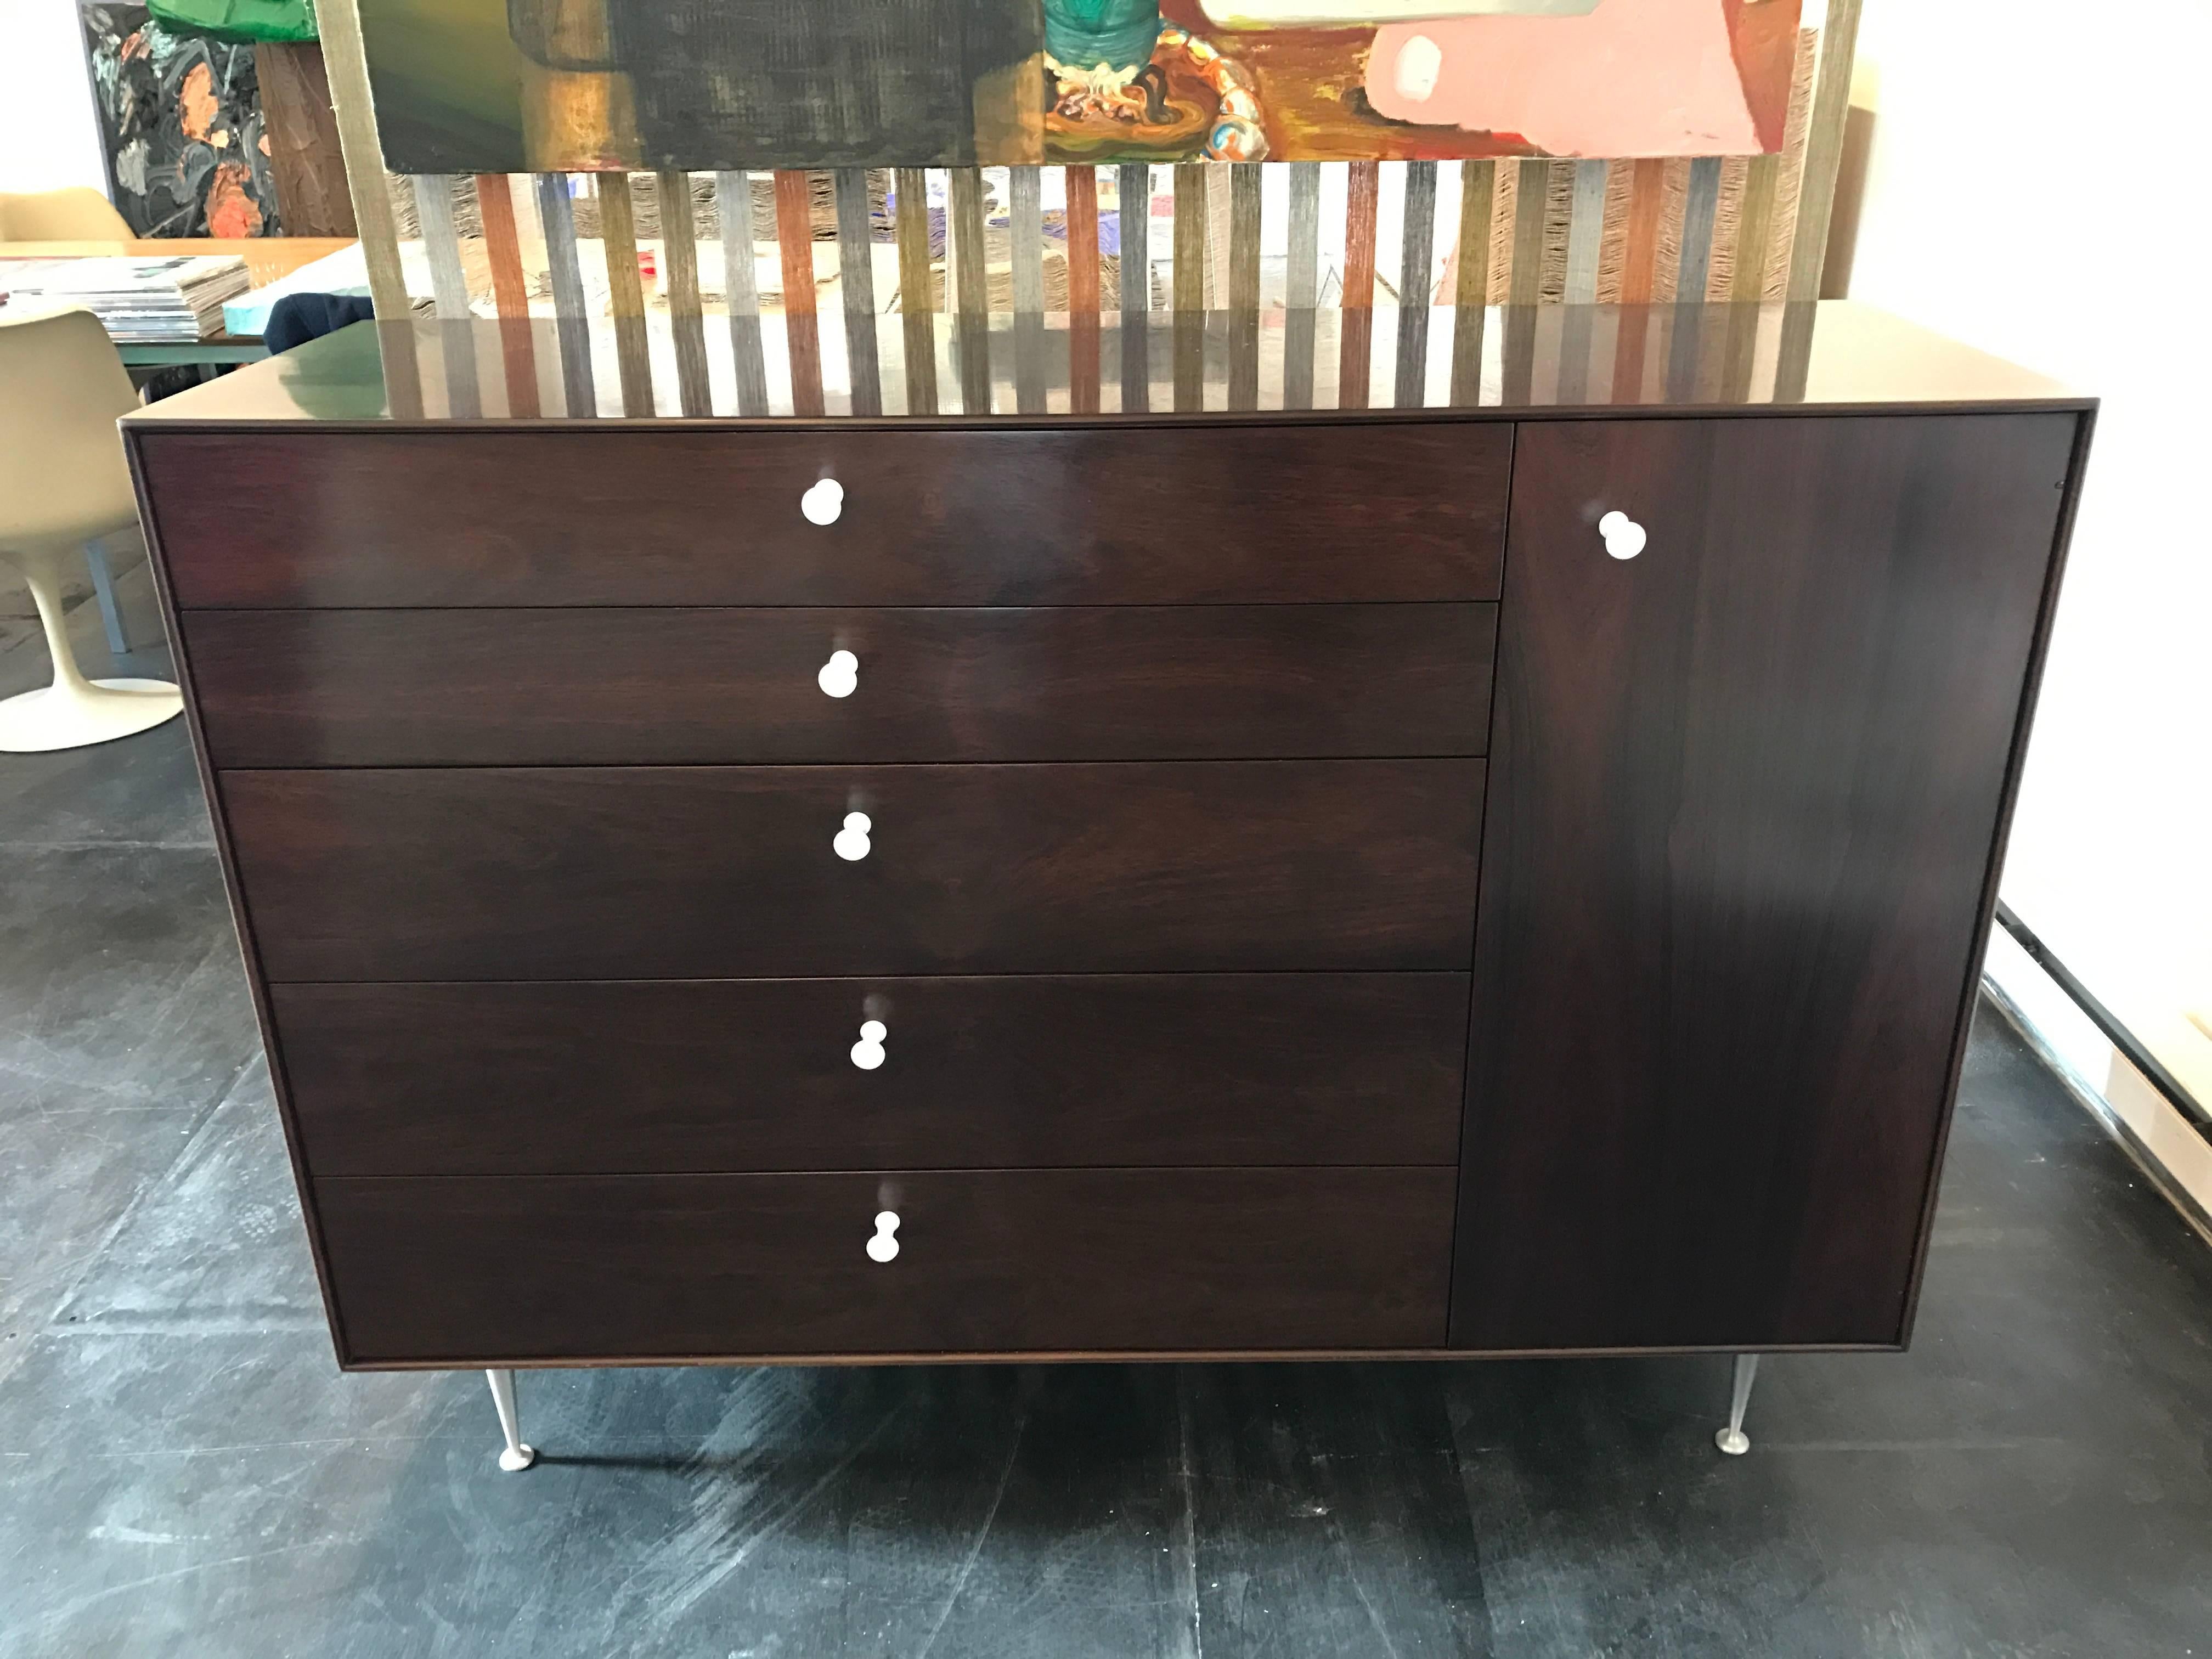 Rosewood thin edge cabinet, chest of drawers with ceramic pulls and two adjustable shelfs, designed by George Nelson for Herman Miller in 1955.